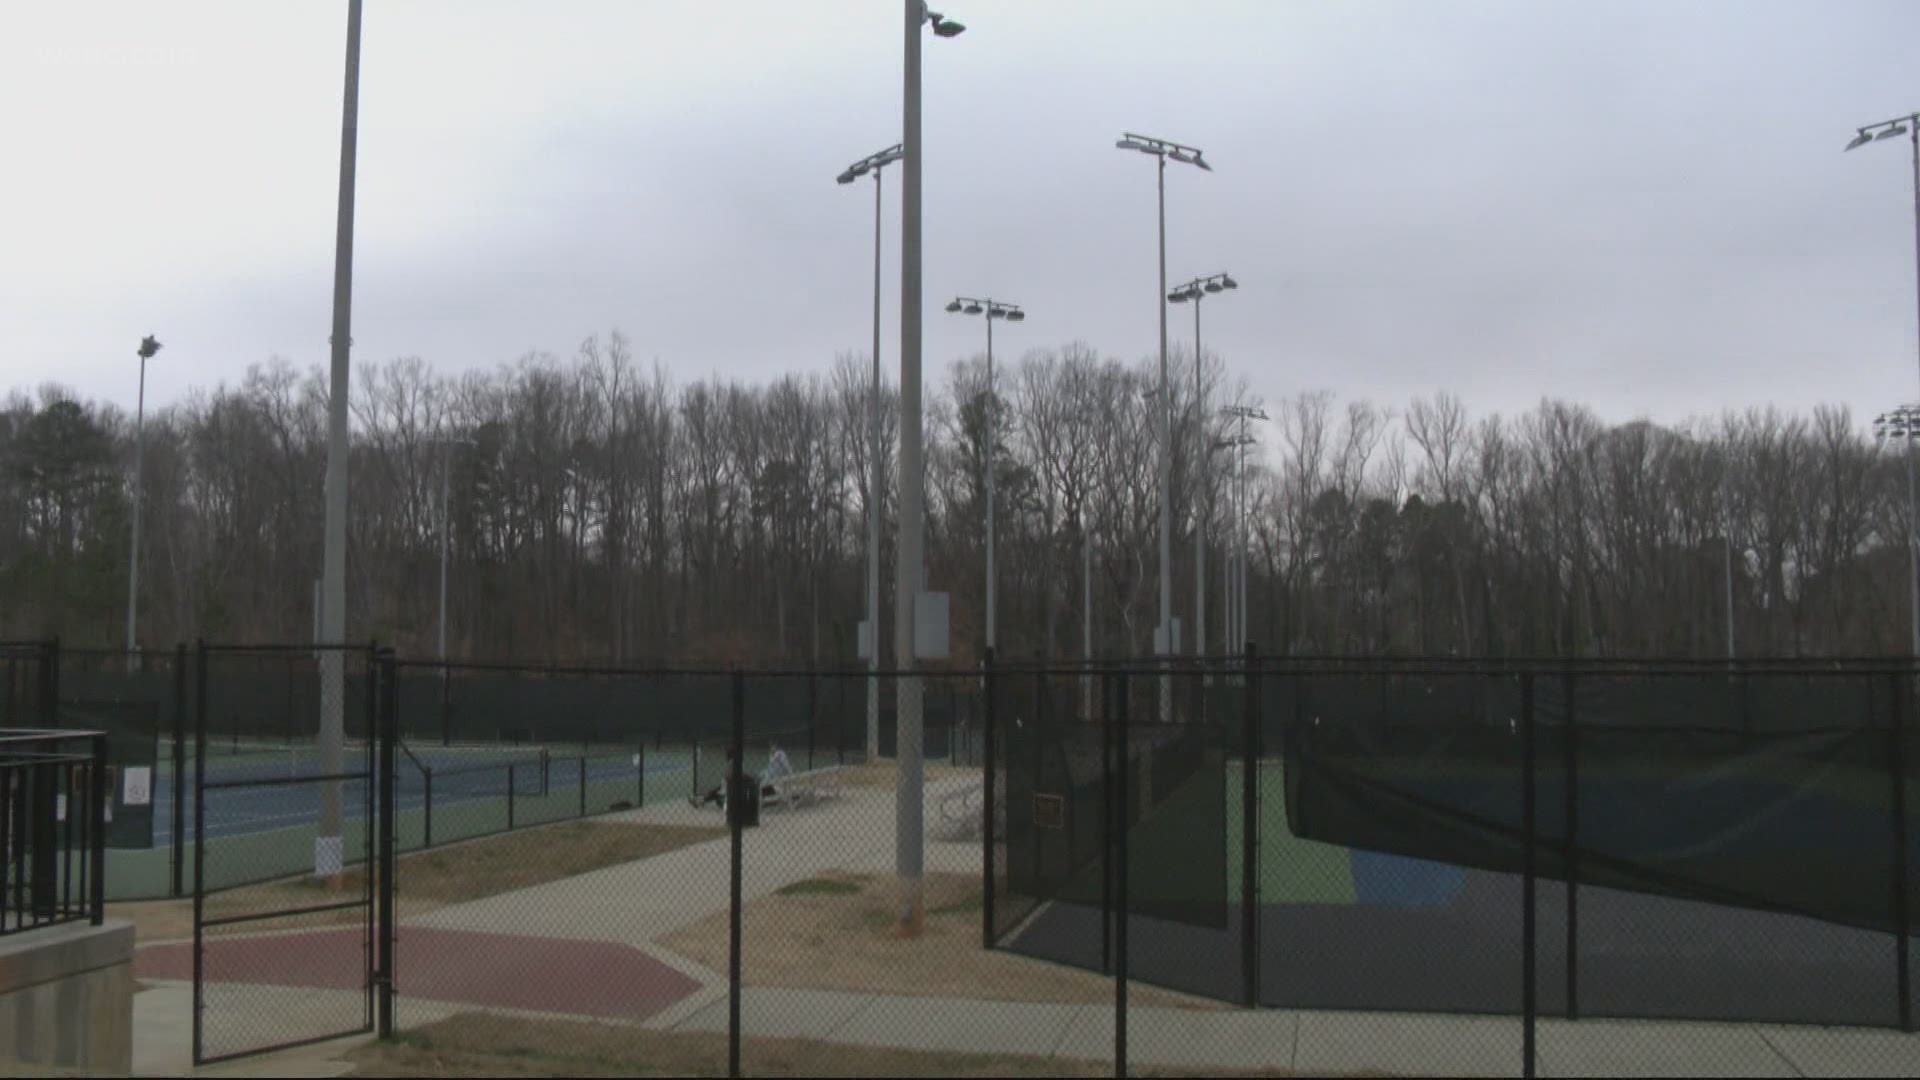 A petition to turn tennis lights on at public parks in Mecklenburg County has reached 1,000 signatures in a week.